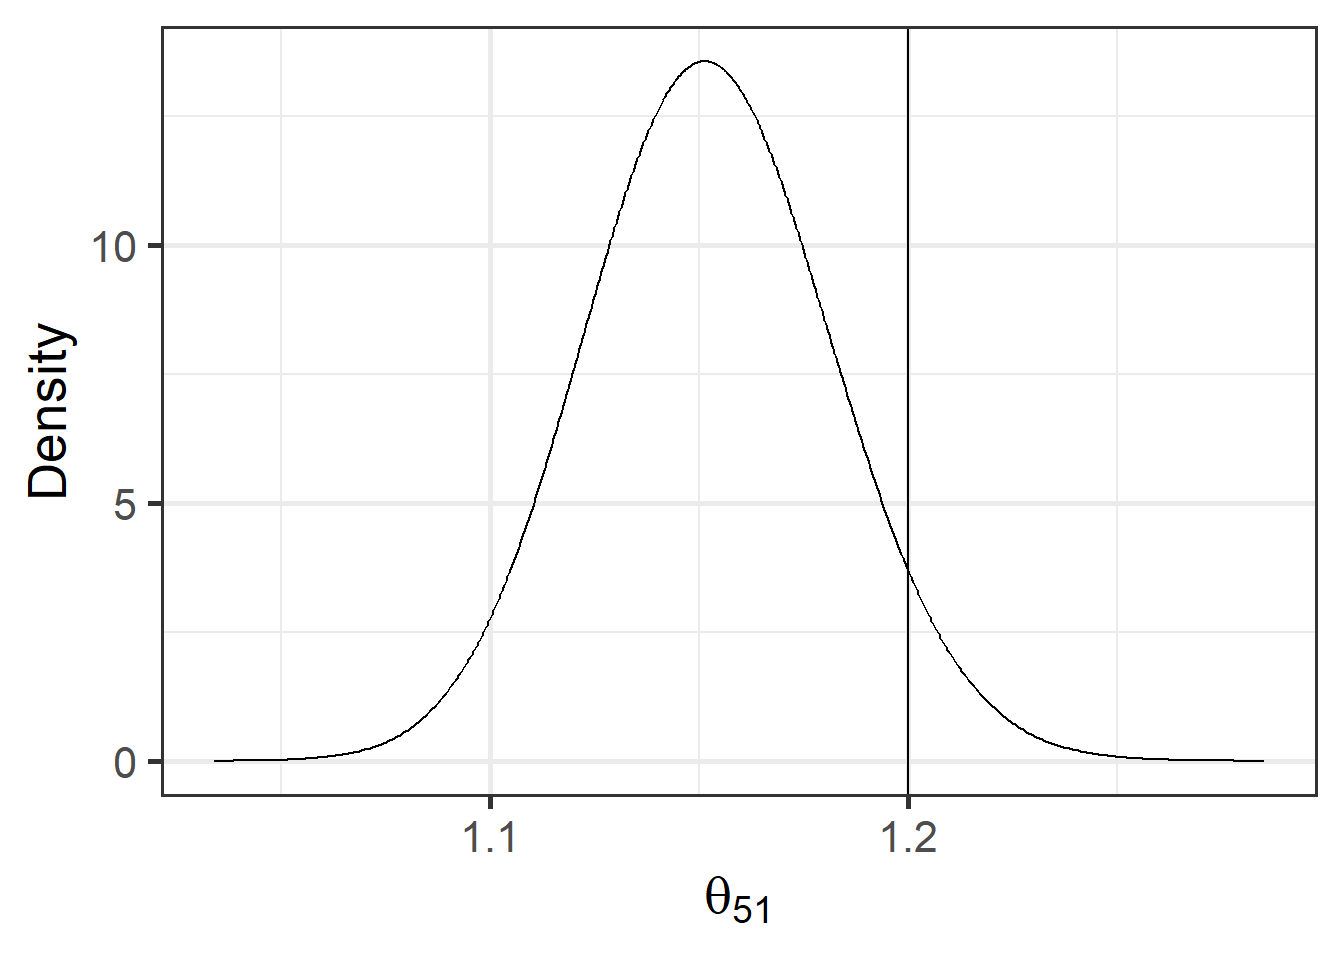 Posterior distribution of the relative risk of area 51 exceeds the threshold value 1.2. Vertical line indicates the threshold value.